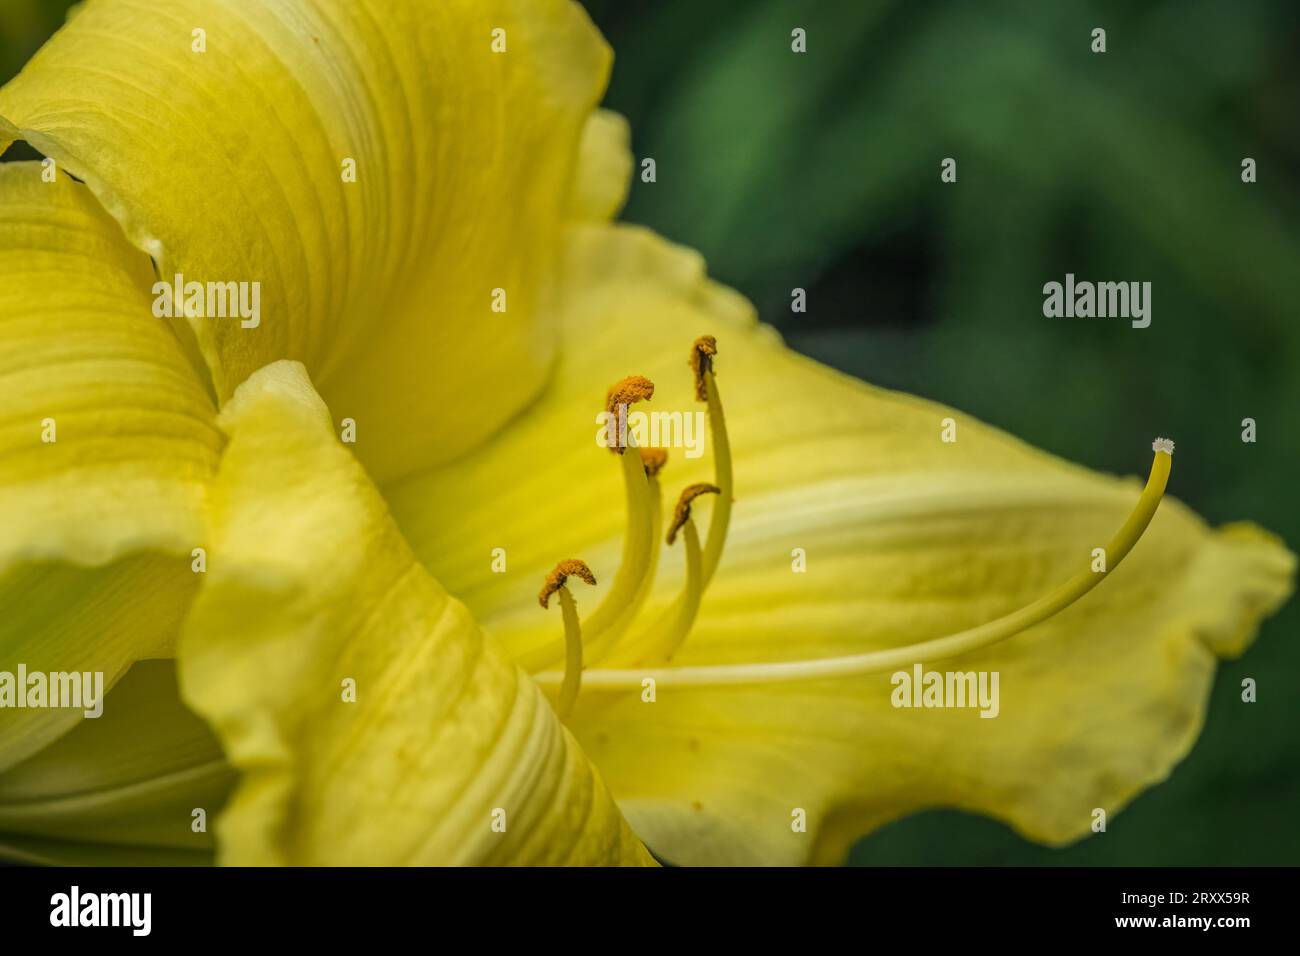 A close up of yellow lily from side angle. Stock Photo